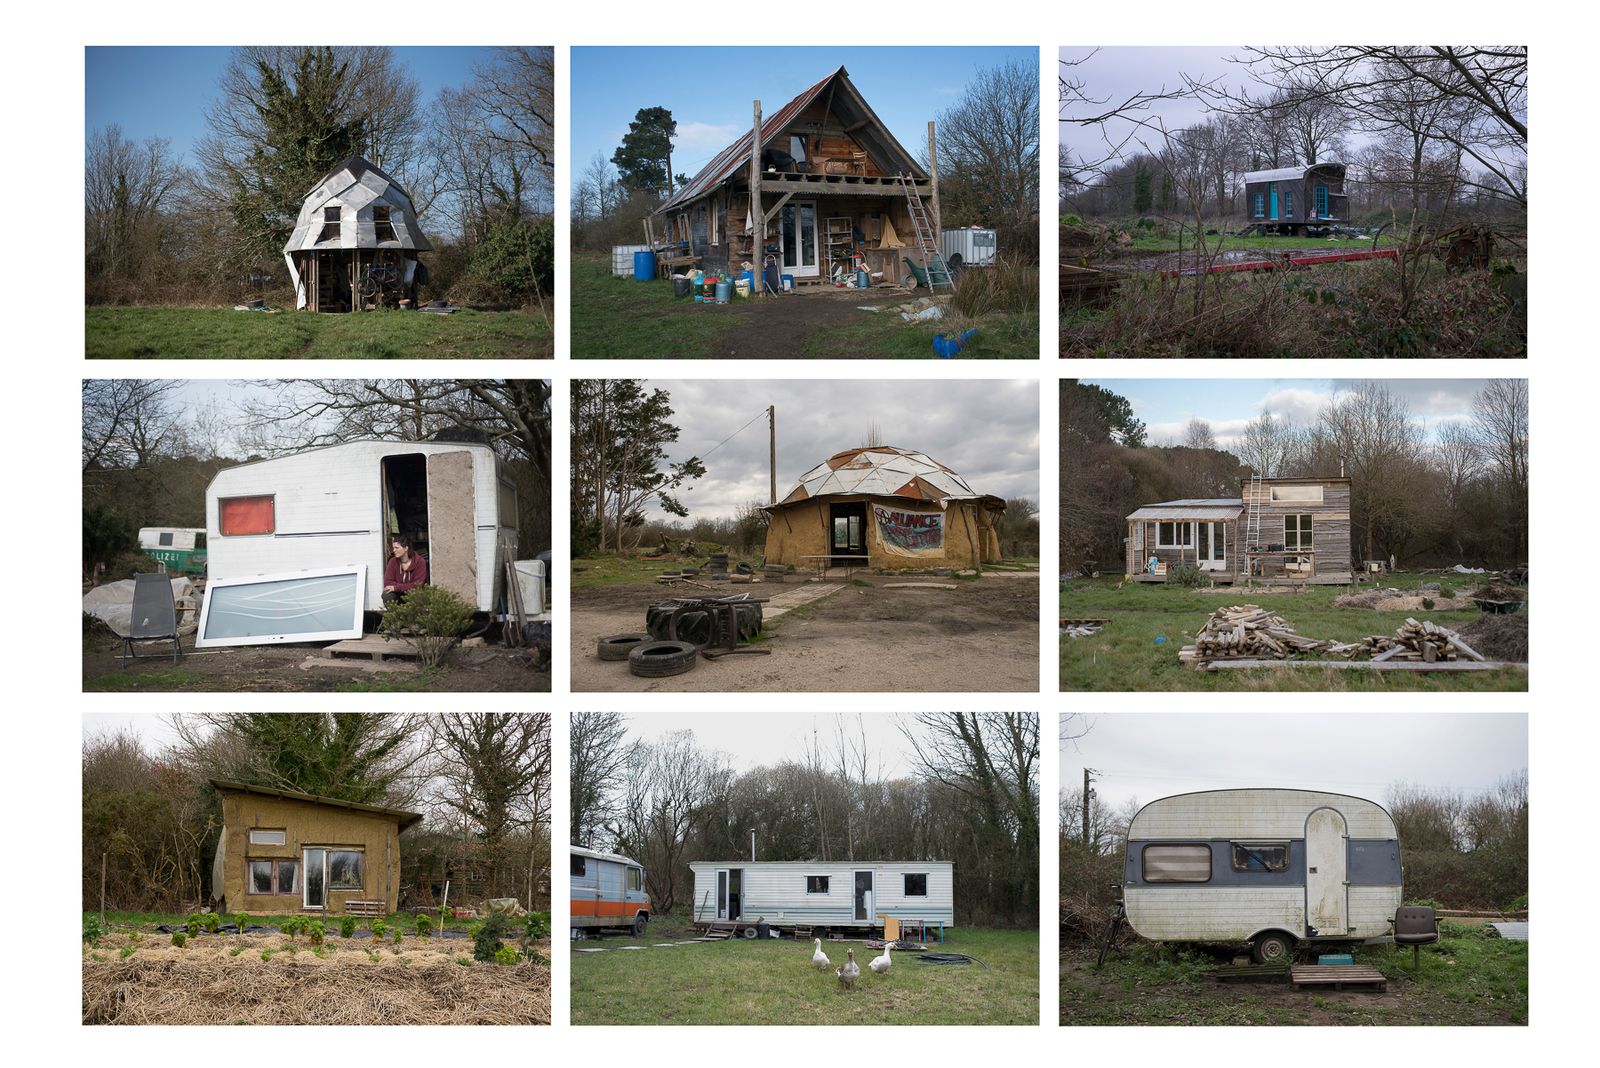 © Penelope Thomaidi - Different types of housing in ZAD of Notre Dame des Landes, France, March 2018.